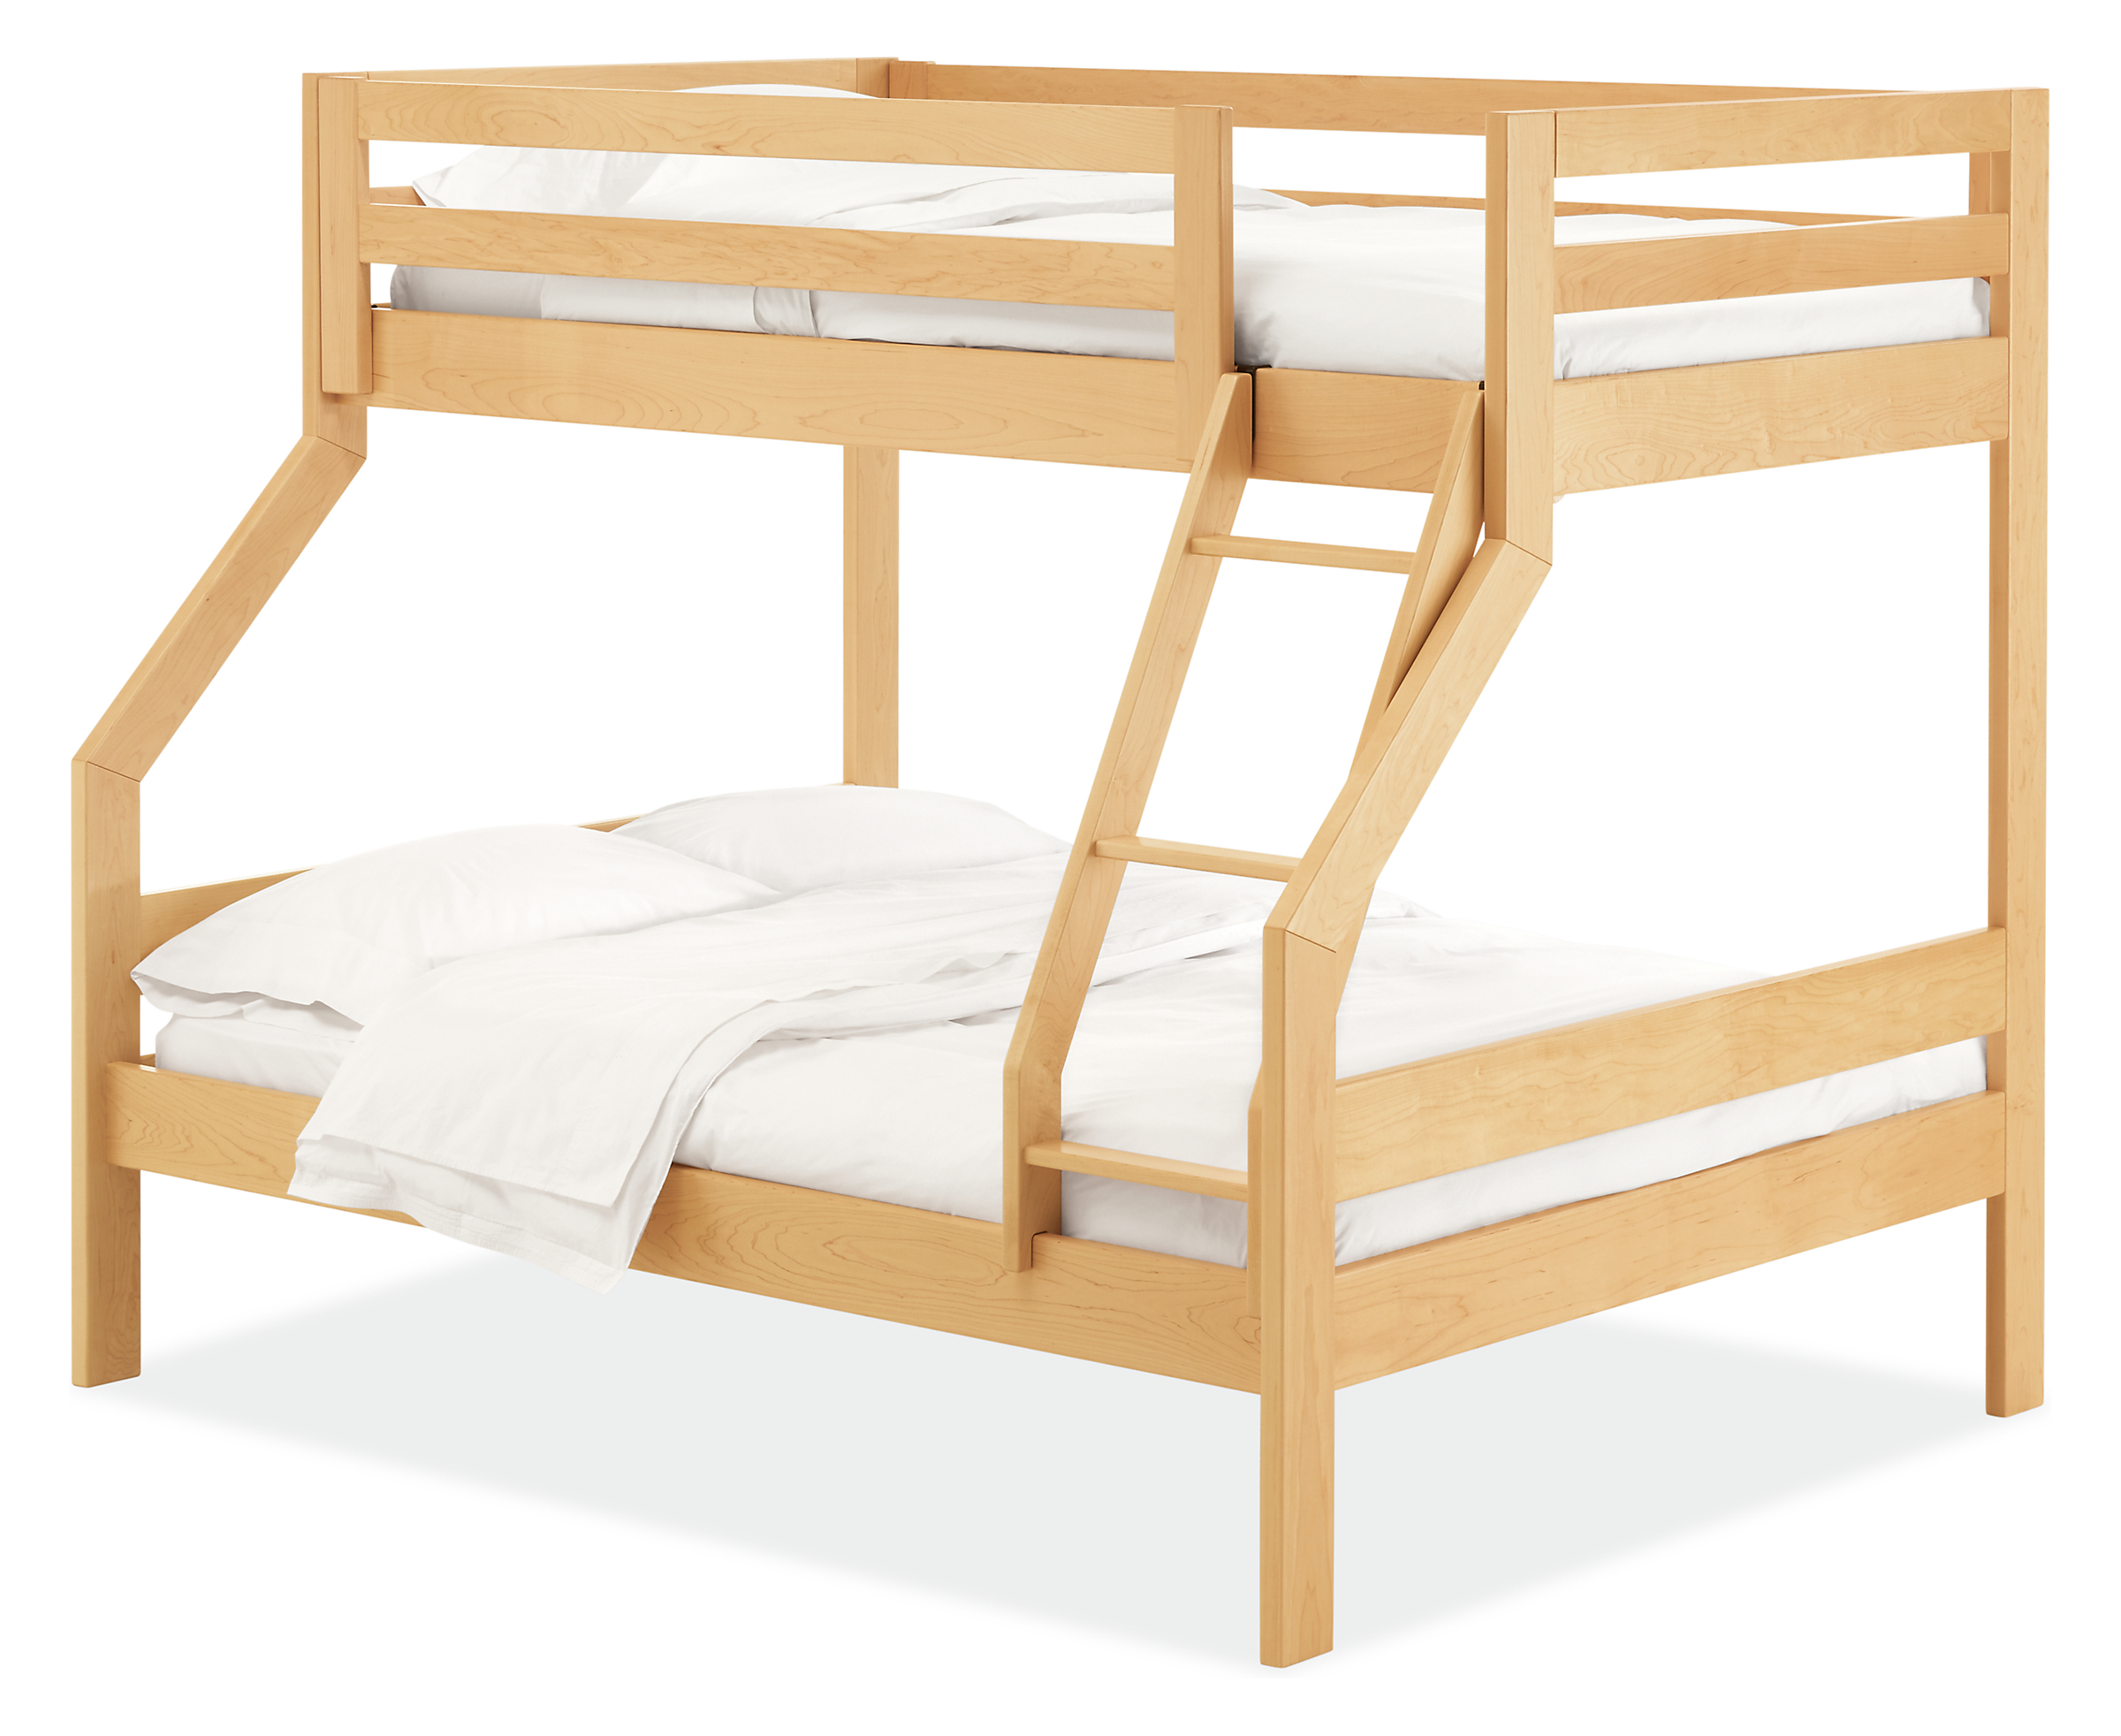 Waverly Bunk Bed - Twin over Full